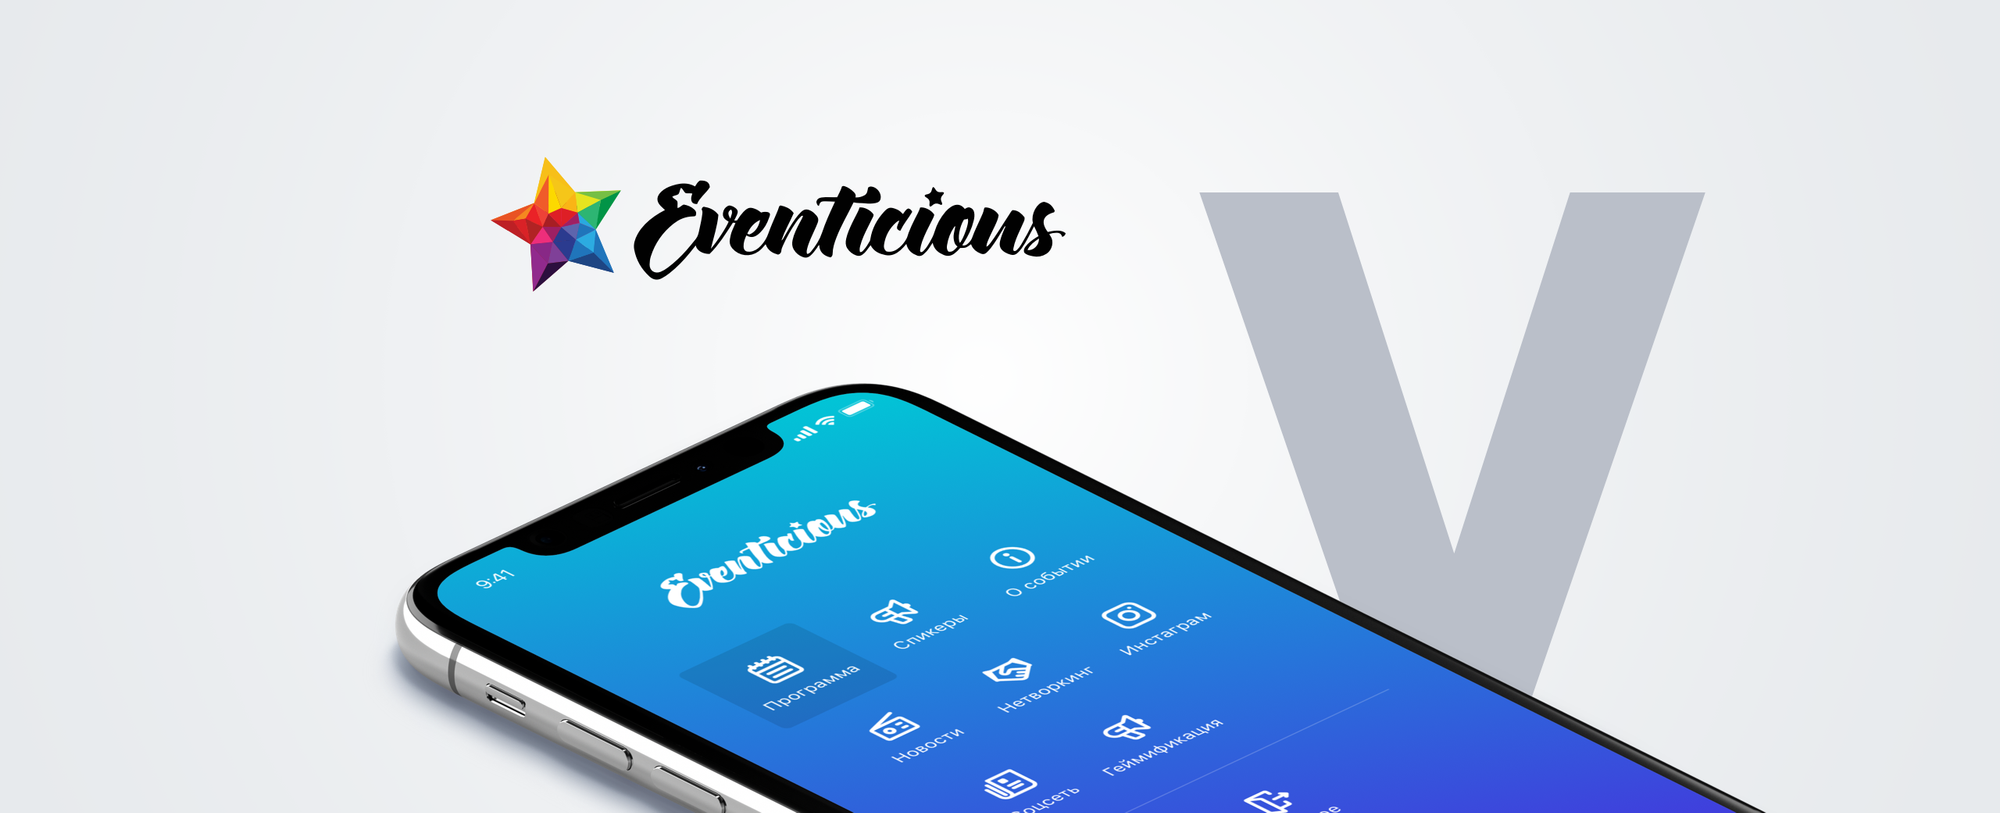 Eventicious V: it’s like the iPhone X, except it’s an app